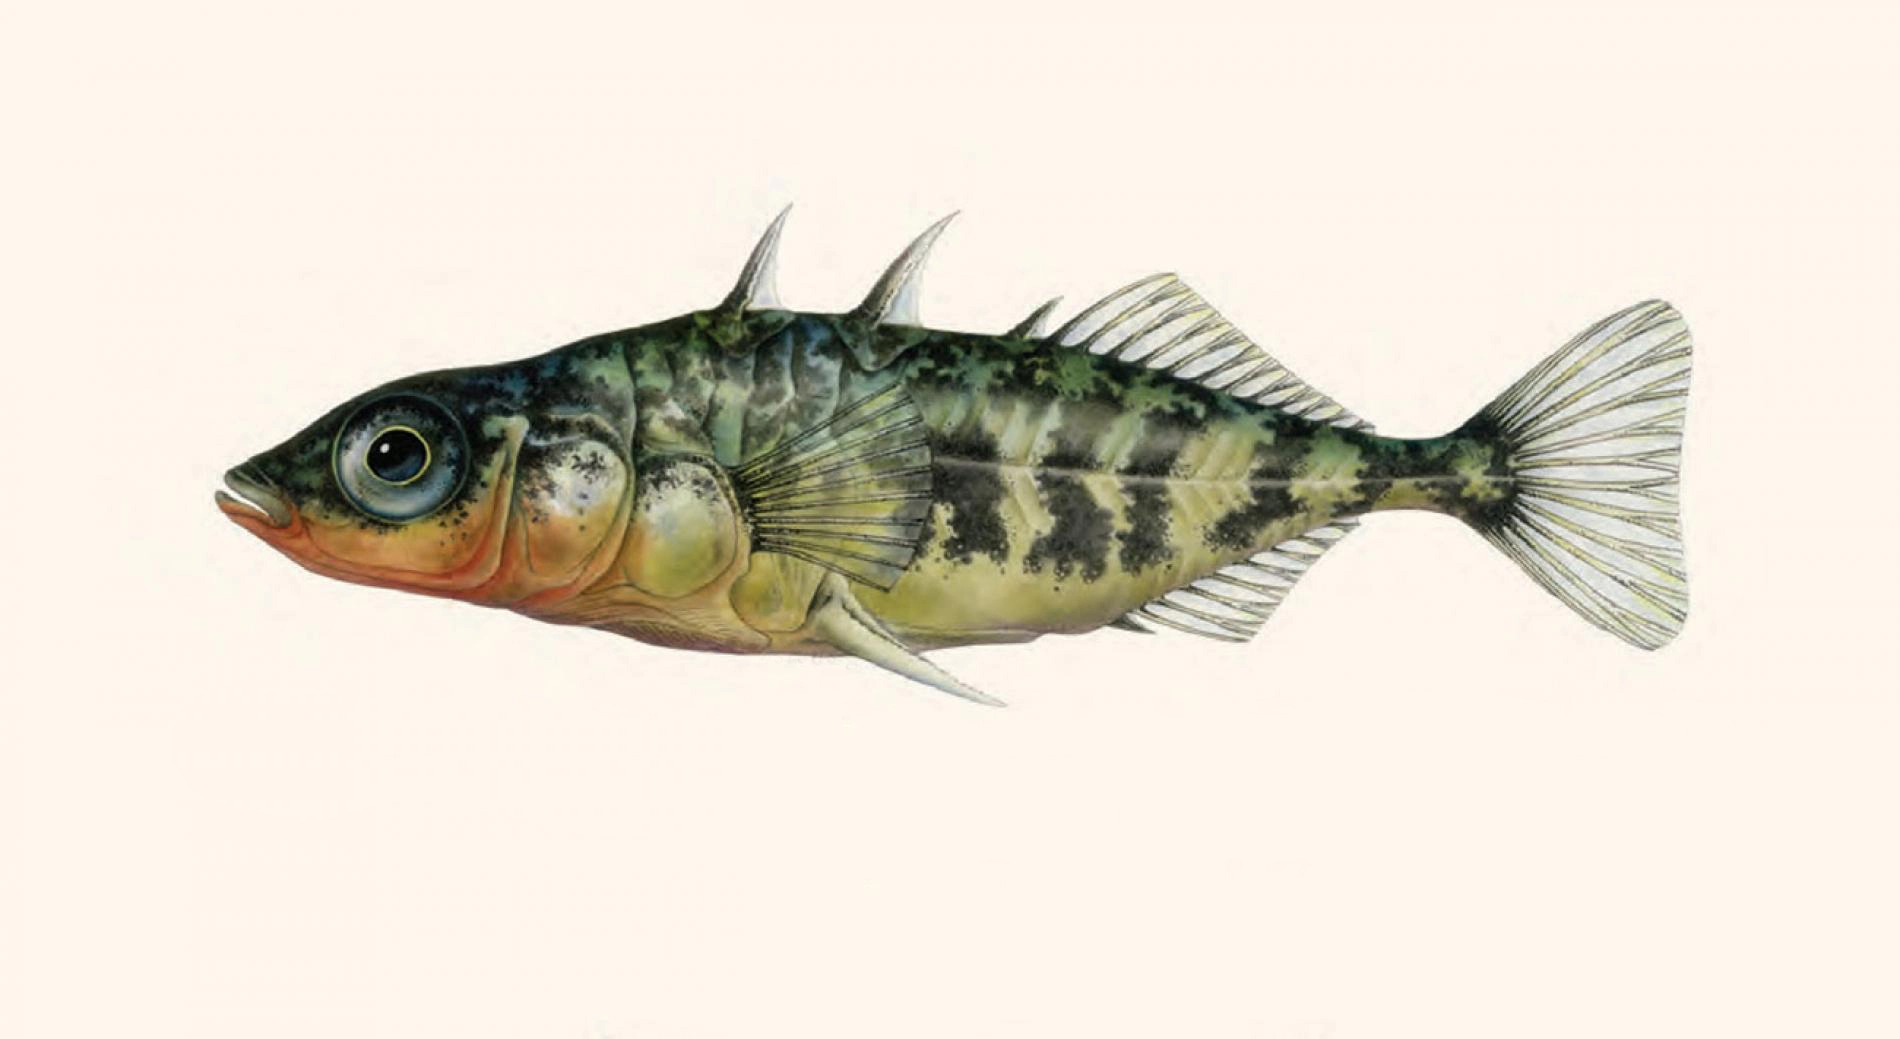 A walleye fish represents Arcadia's Scientific Illustration major, a blend of art and science